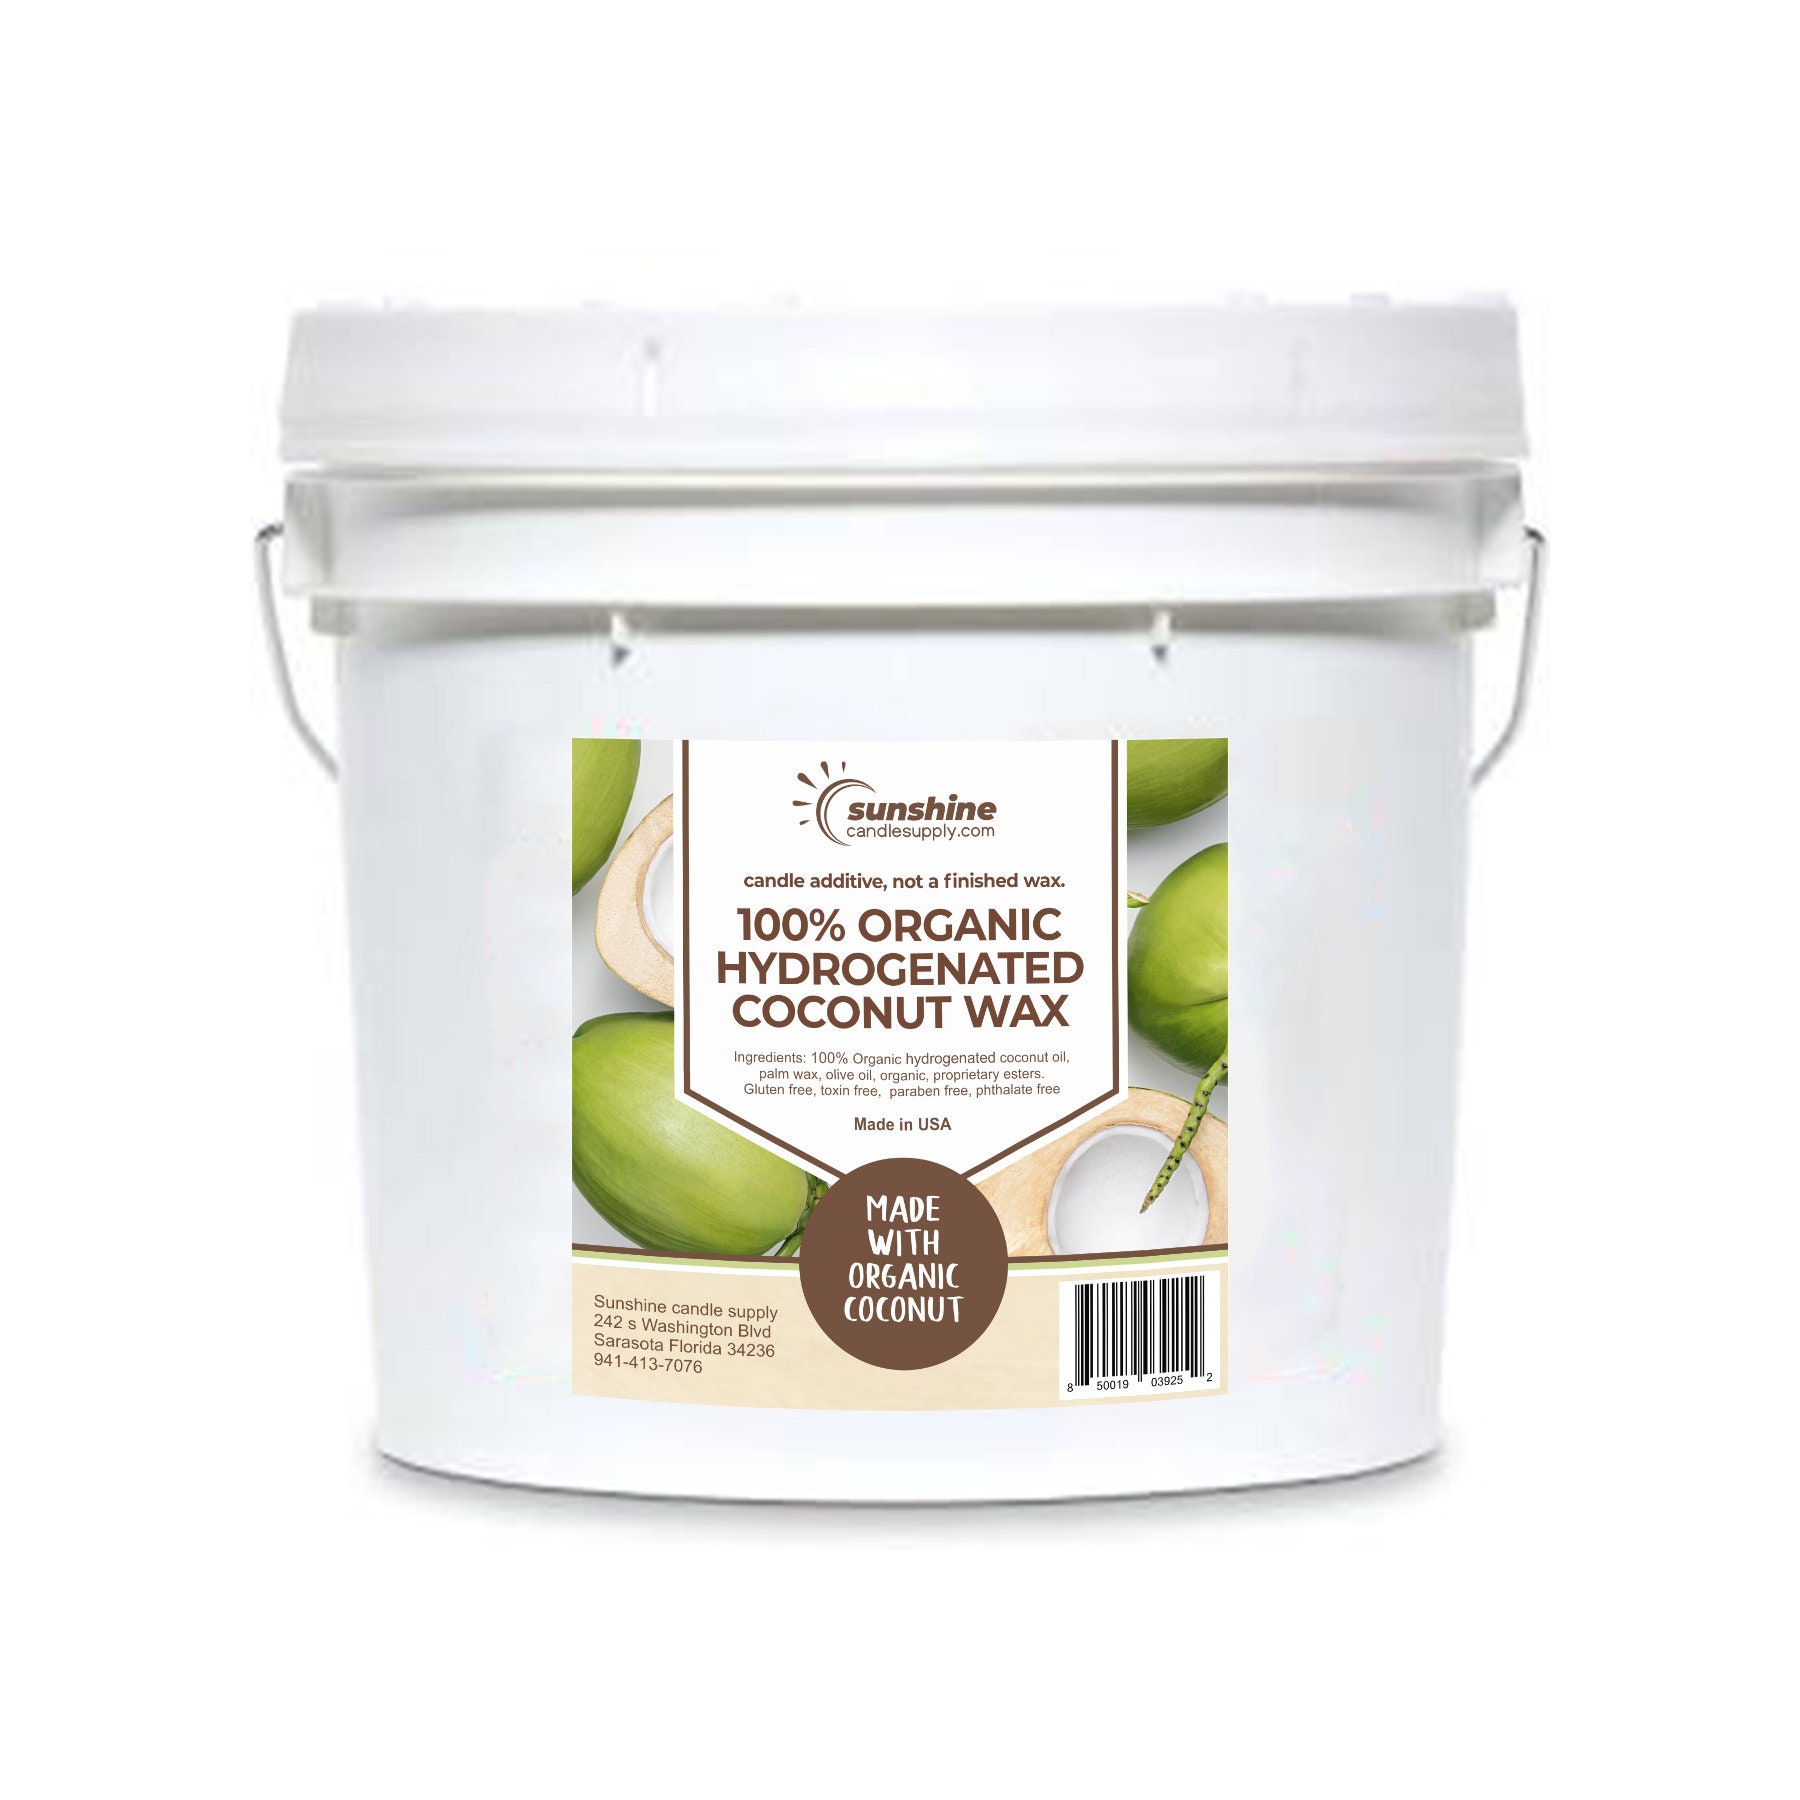 100% Organic Pure Coconut Wax, Nothing Added, Hydrogenated Coconut Wax,  Advanced Coconut Wax, High Tech Coconut Wax, Vegan Coconut Wax 